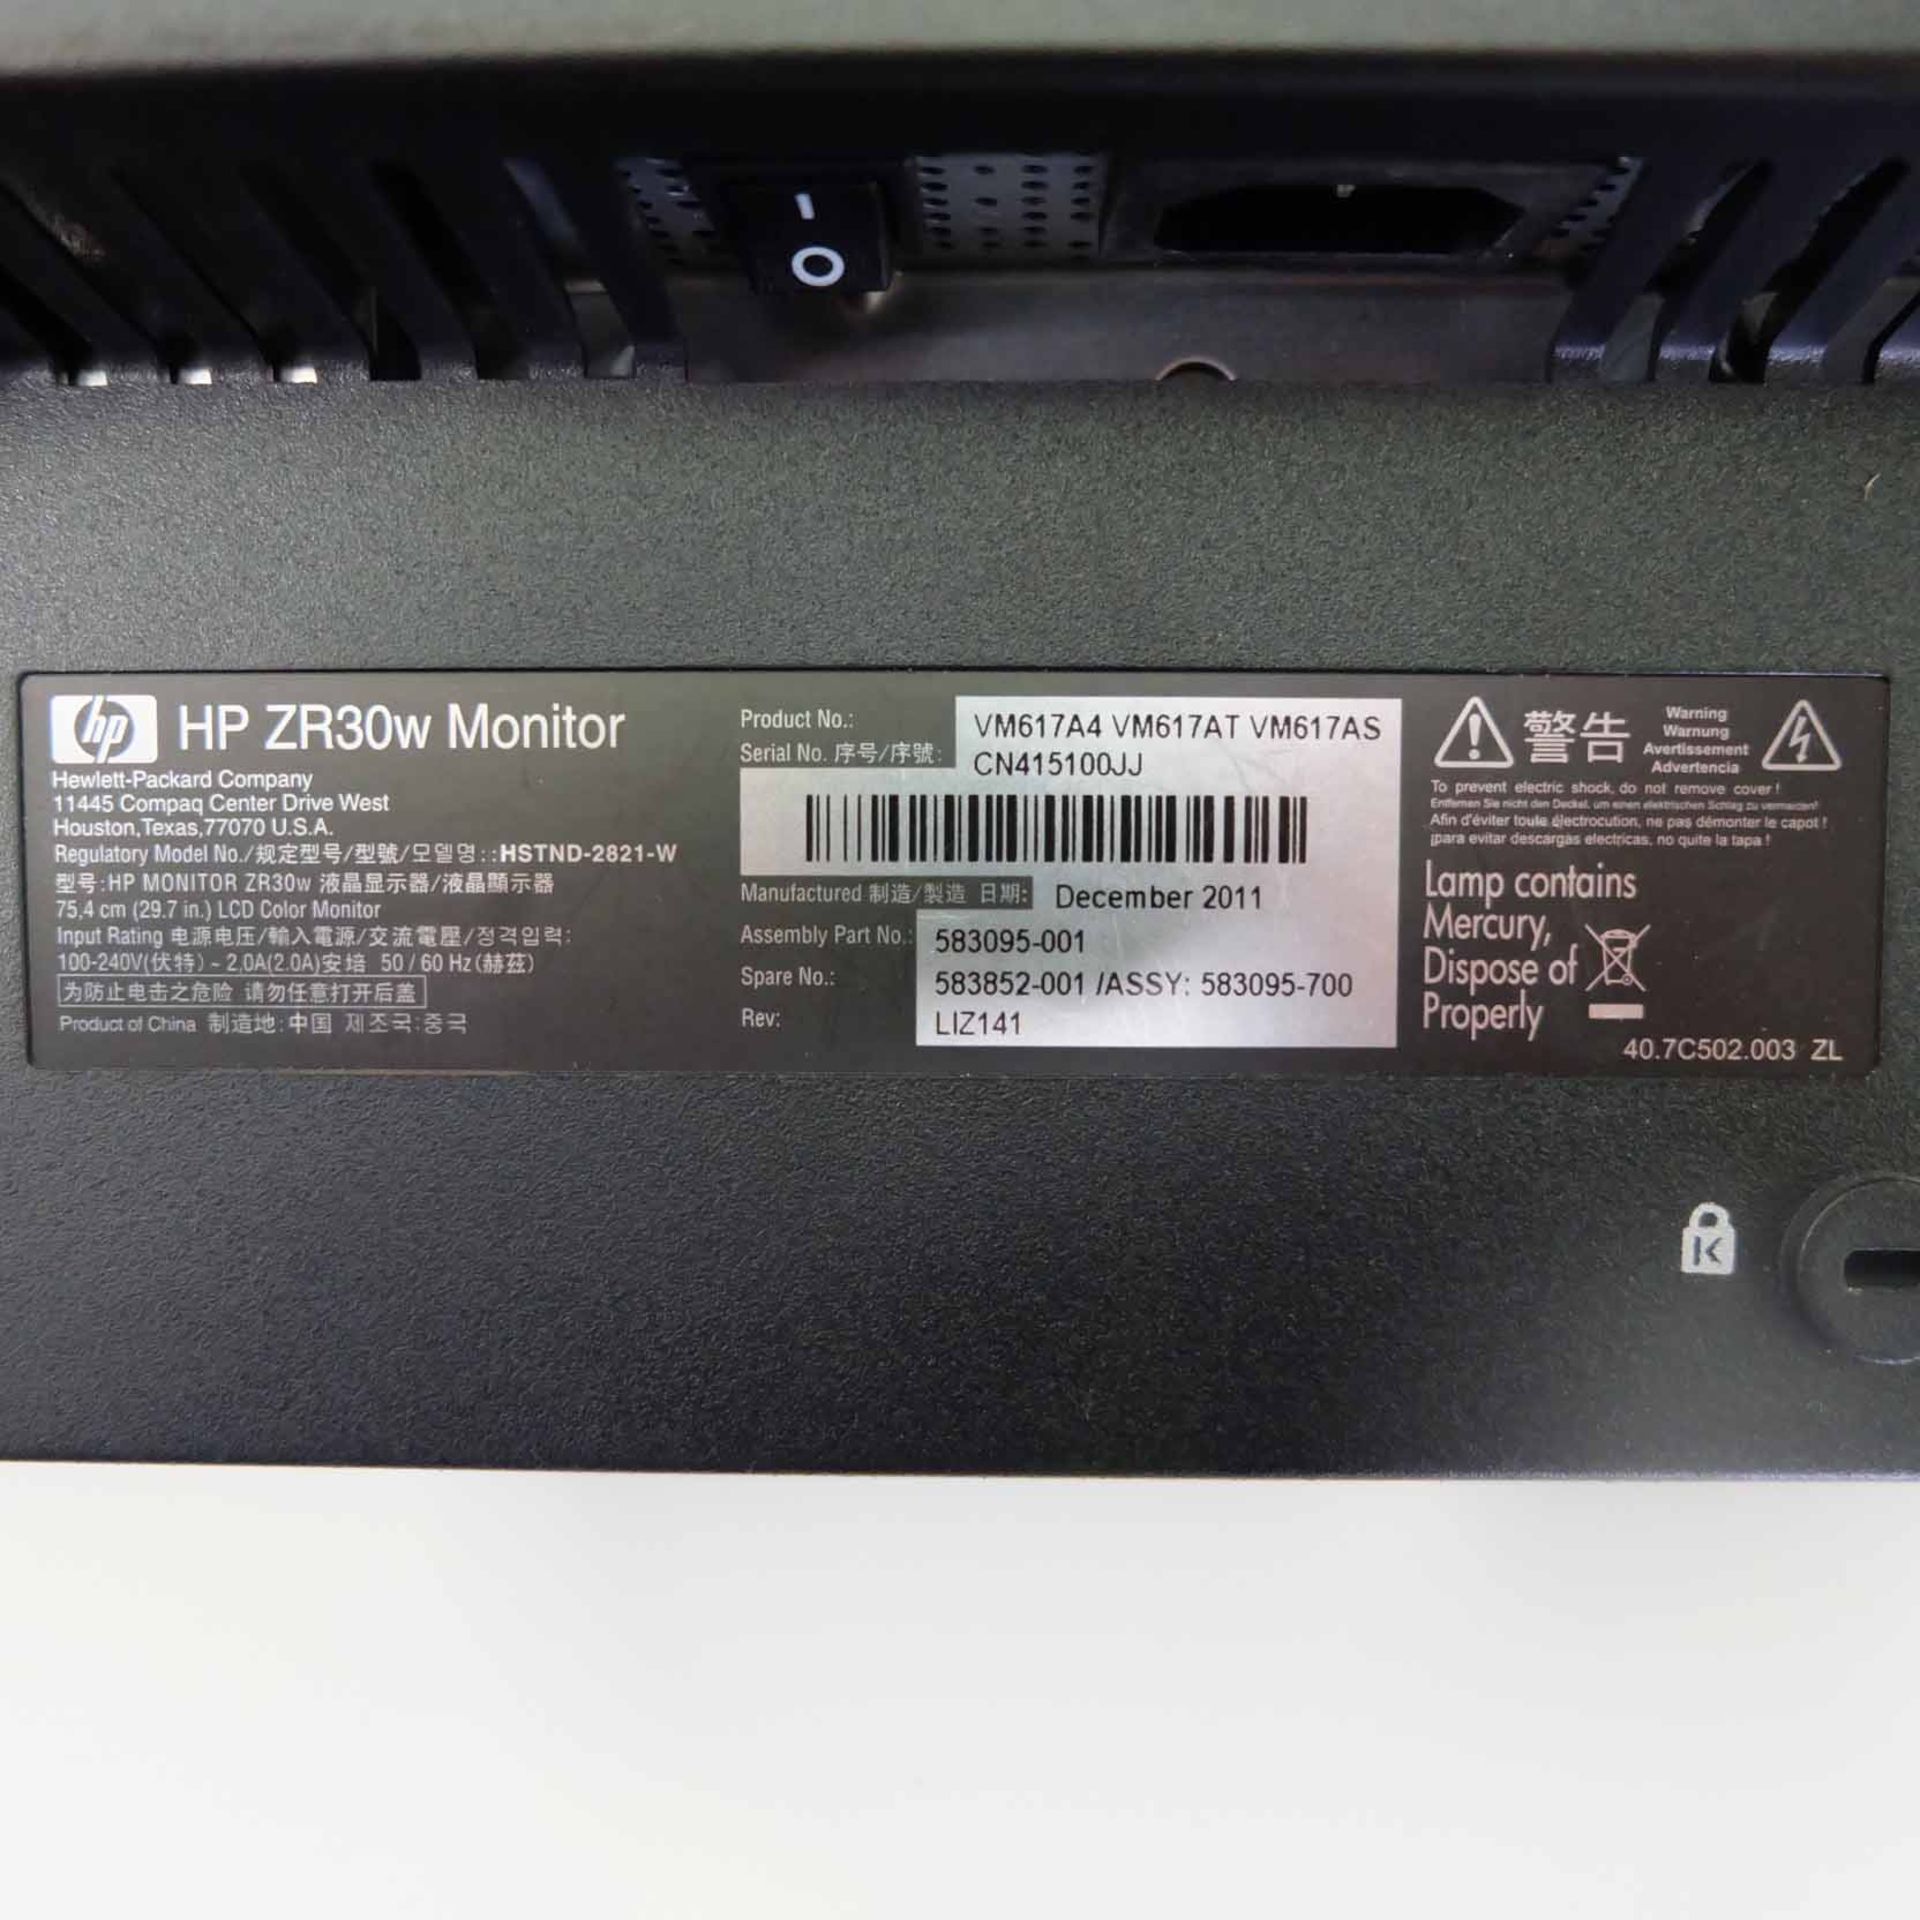 HP Model HPZR30W LCD Computer Monitor. Size 30". Tilting and Swivelling. - Image 9 of 10